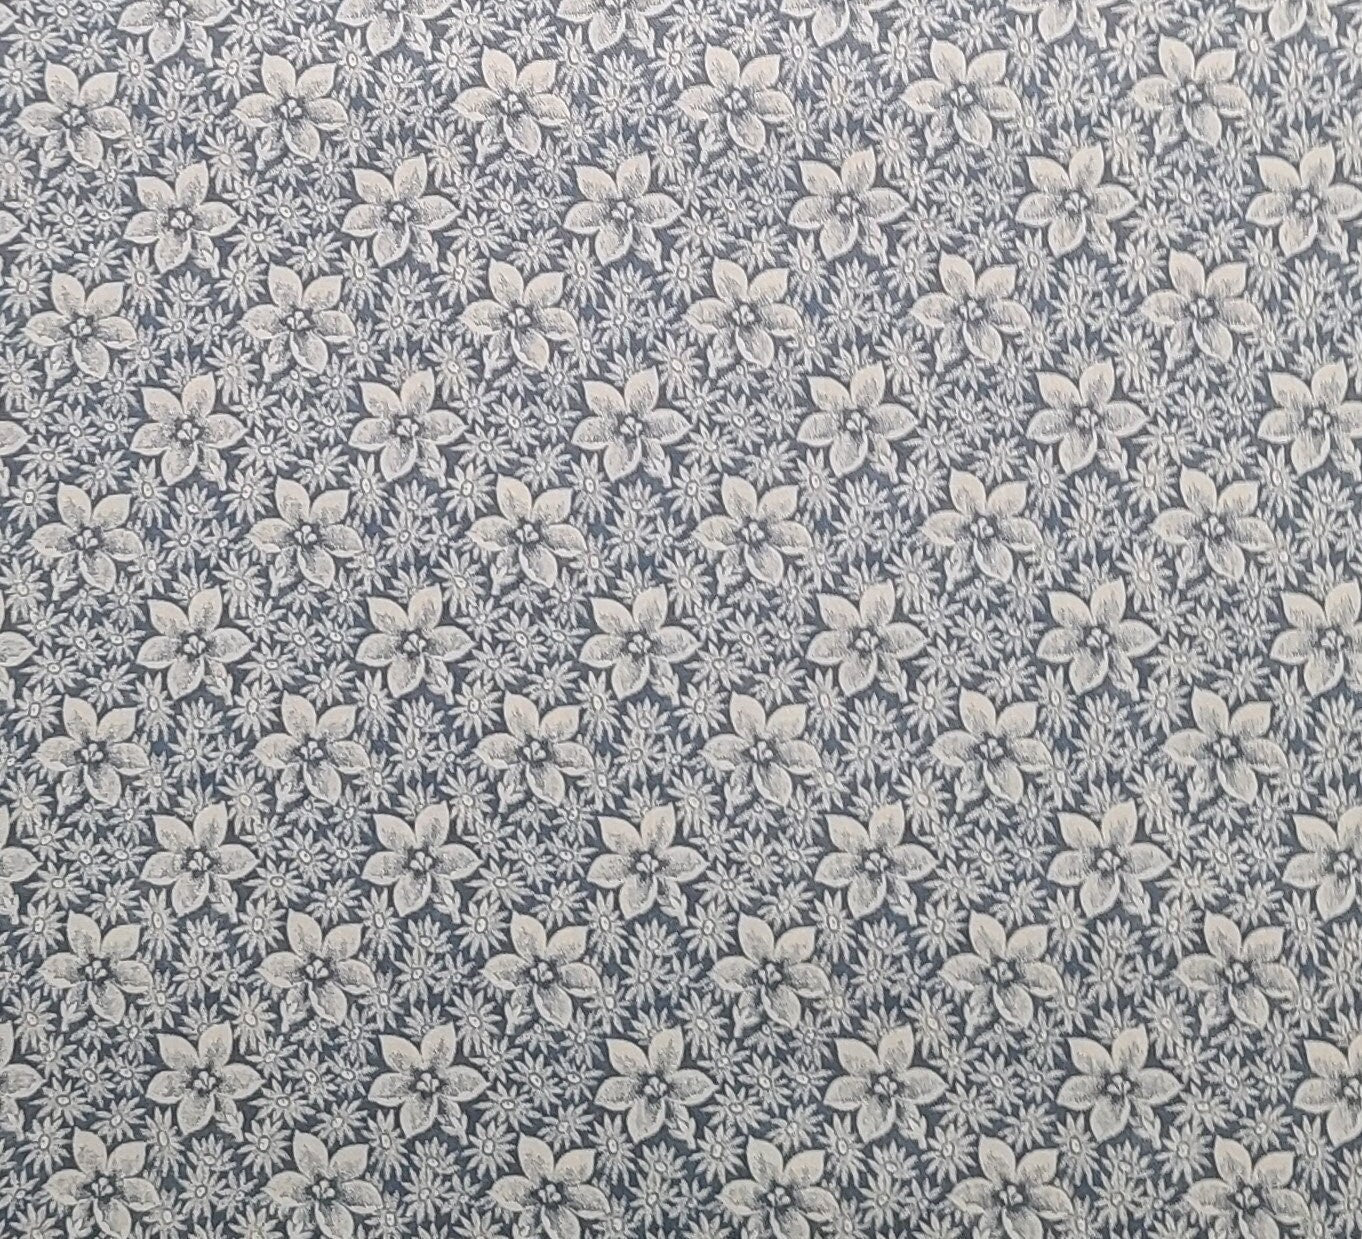 Slate Blue Fabric / White Flower Print - Selvage to Selvage Print